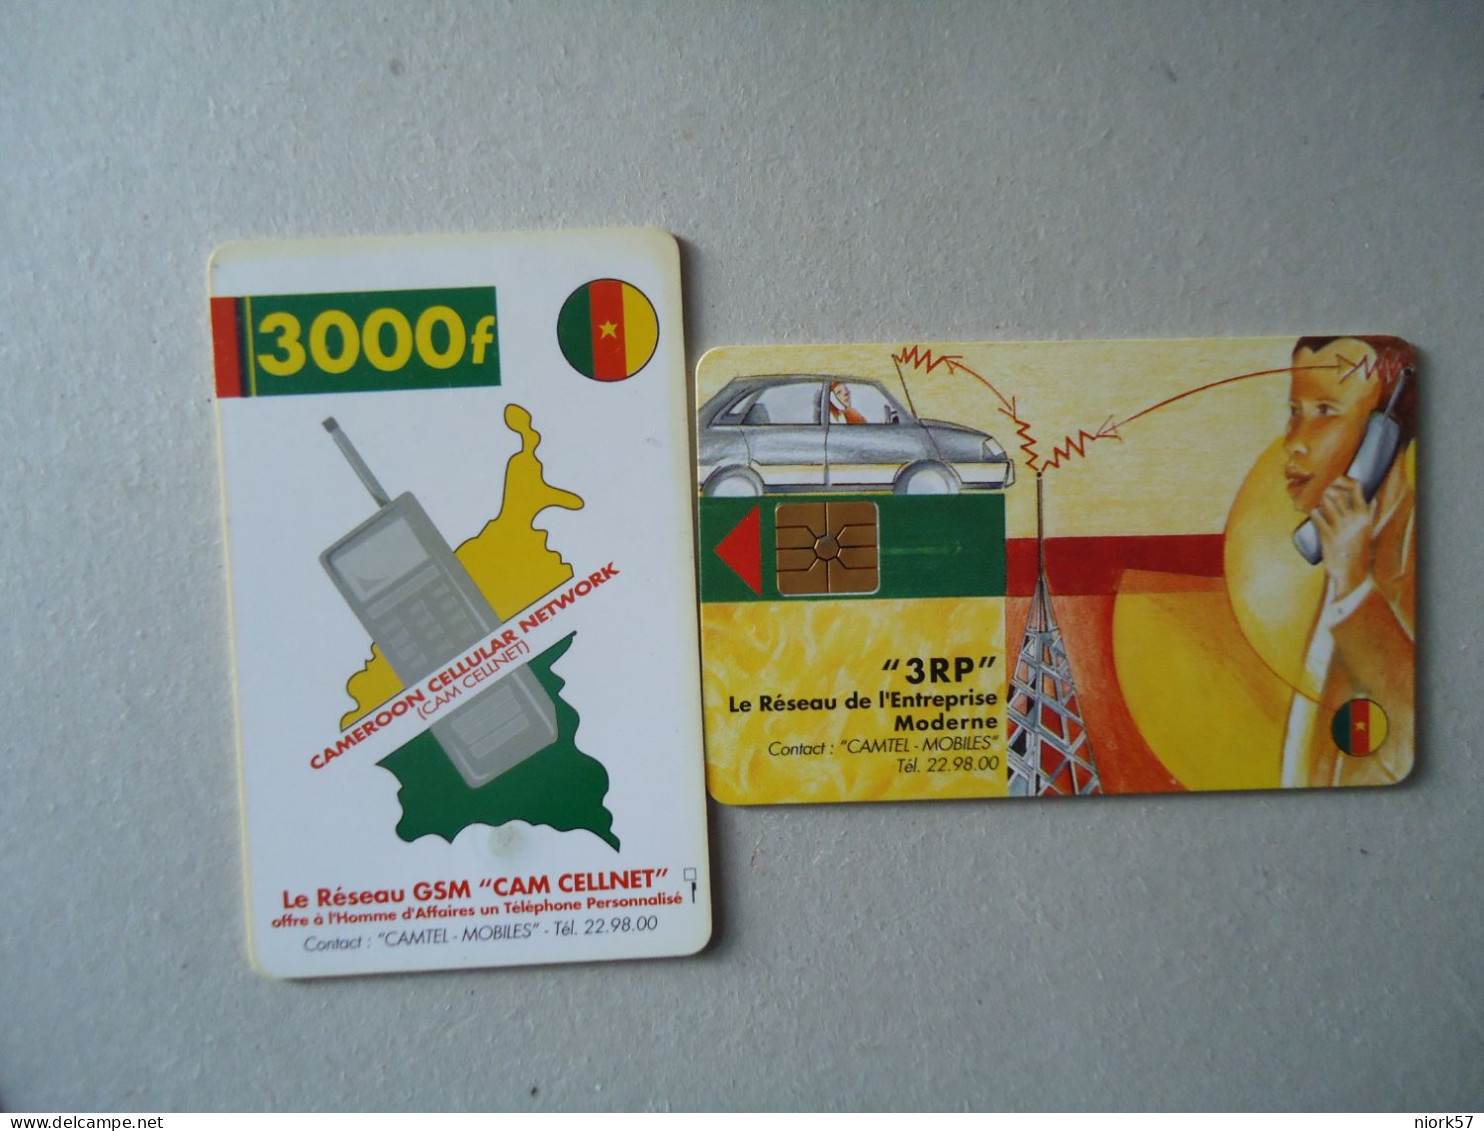 CAMEROON  USED CARDS  PAINTING 5000F  BACK SIDE CARS - Kamerun